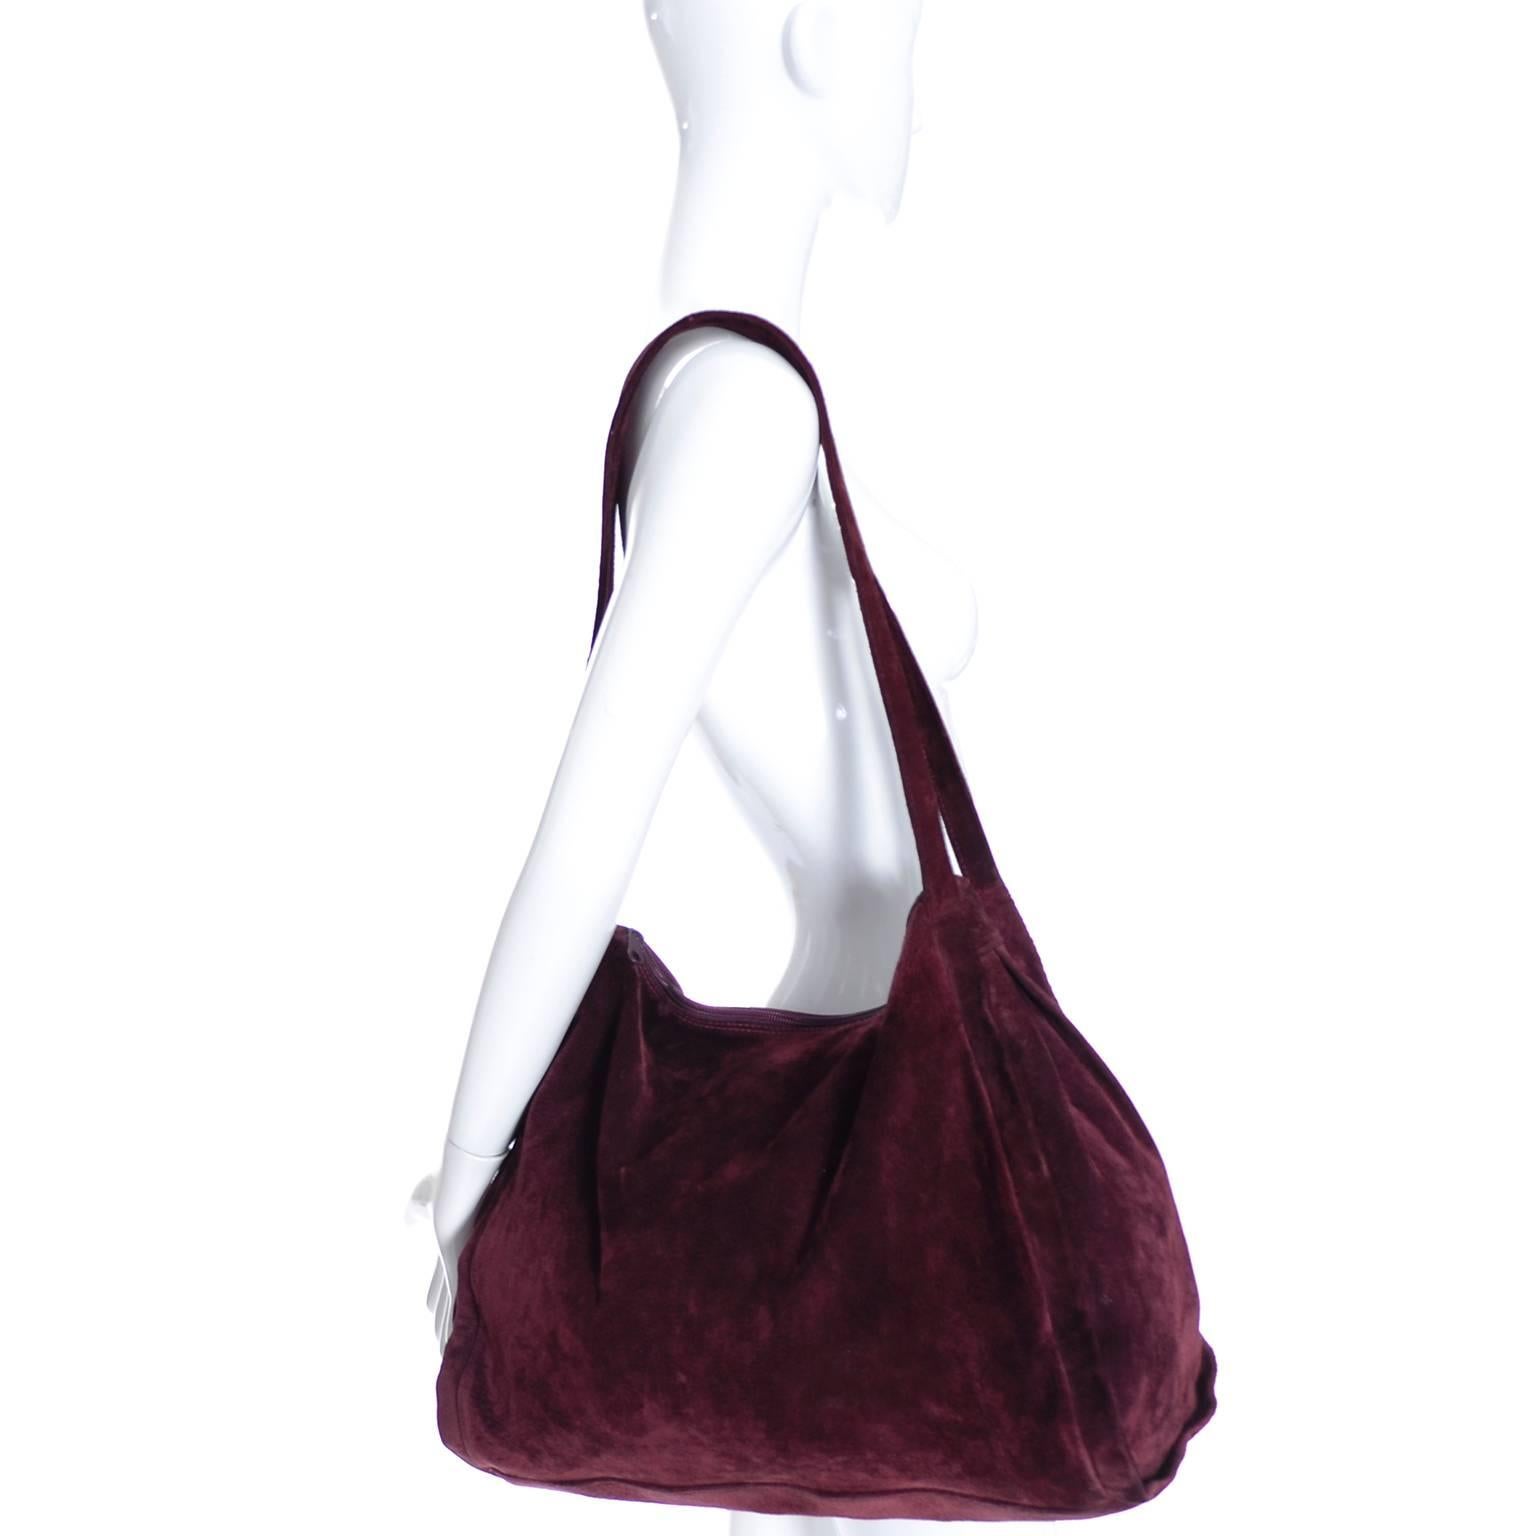 This is a gorgeous suede vintage bag from Donna Karan.  The bag is in a perfect shade of burgundy with a top zipper.  This bag measures 17